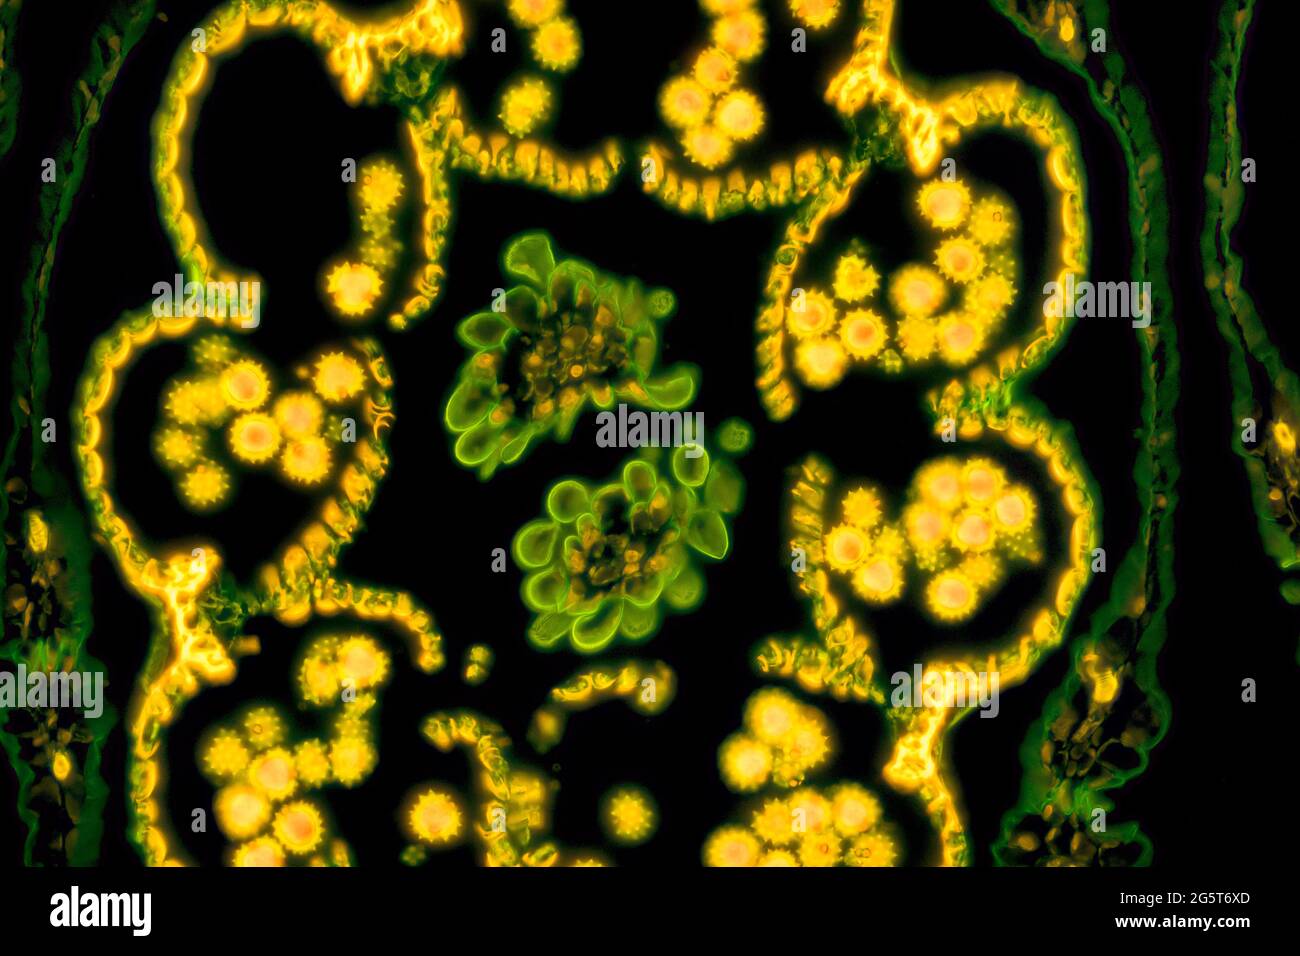 common daisy, lawn daisy, English daisy (Bellis perennis), cross section through a flower head, fluorescence microscope image, magnification x57 Stock Photo